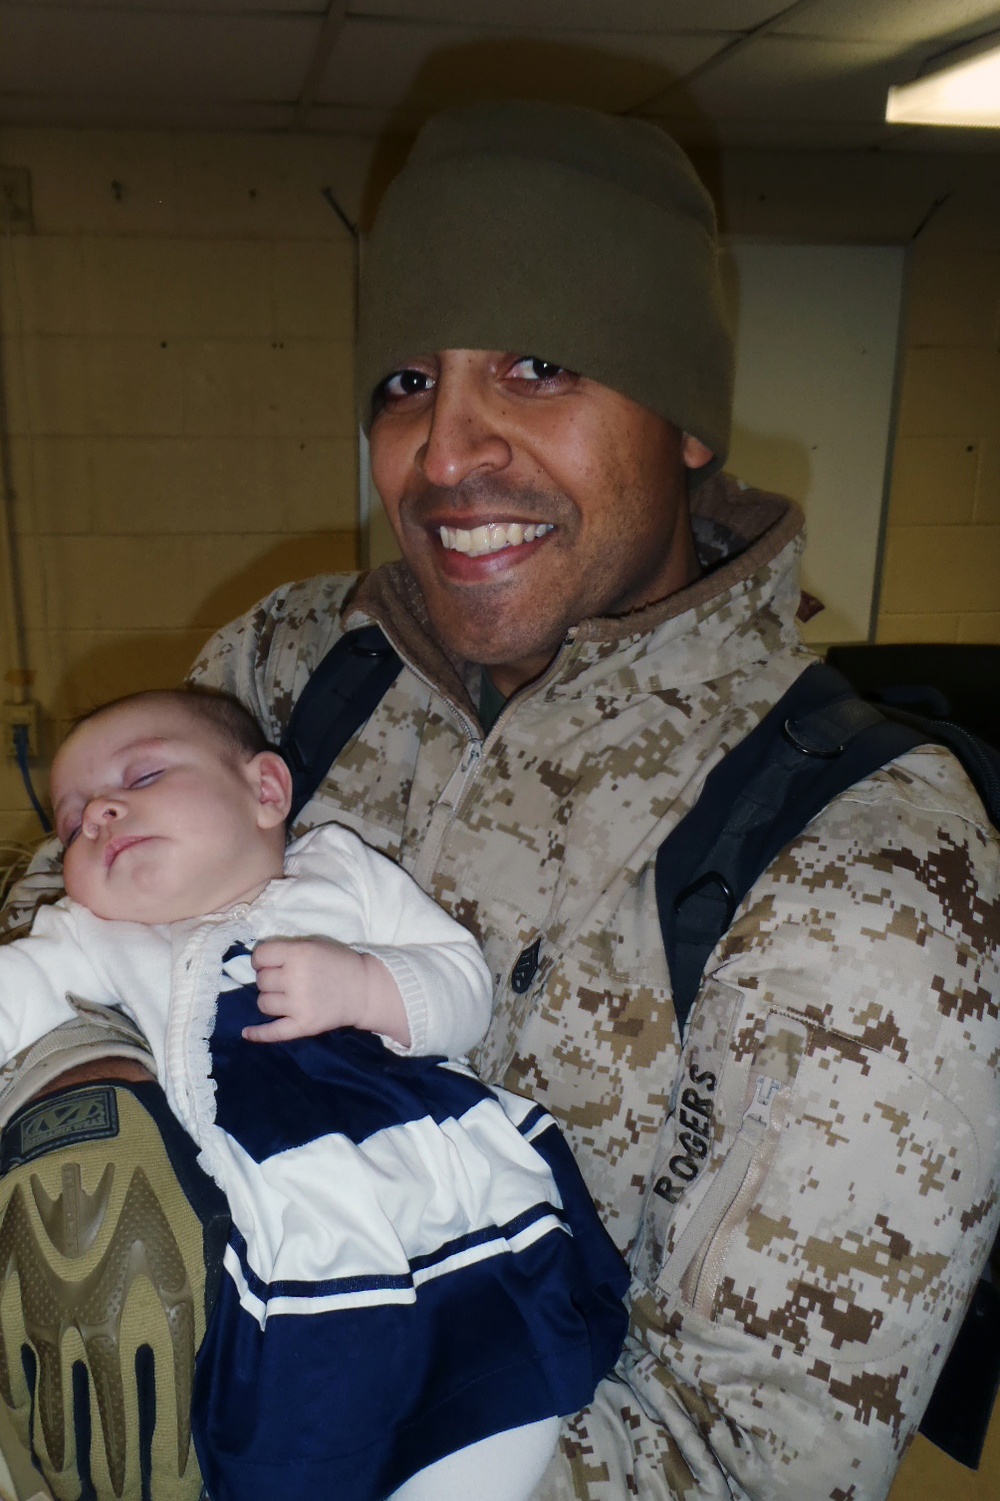 It’s a girl: Marine father meets baby girl